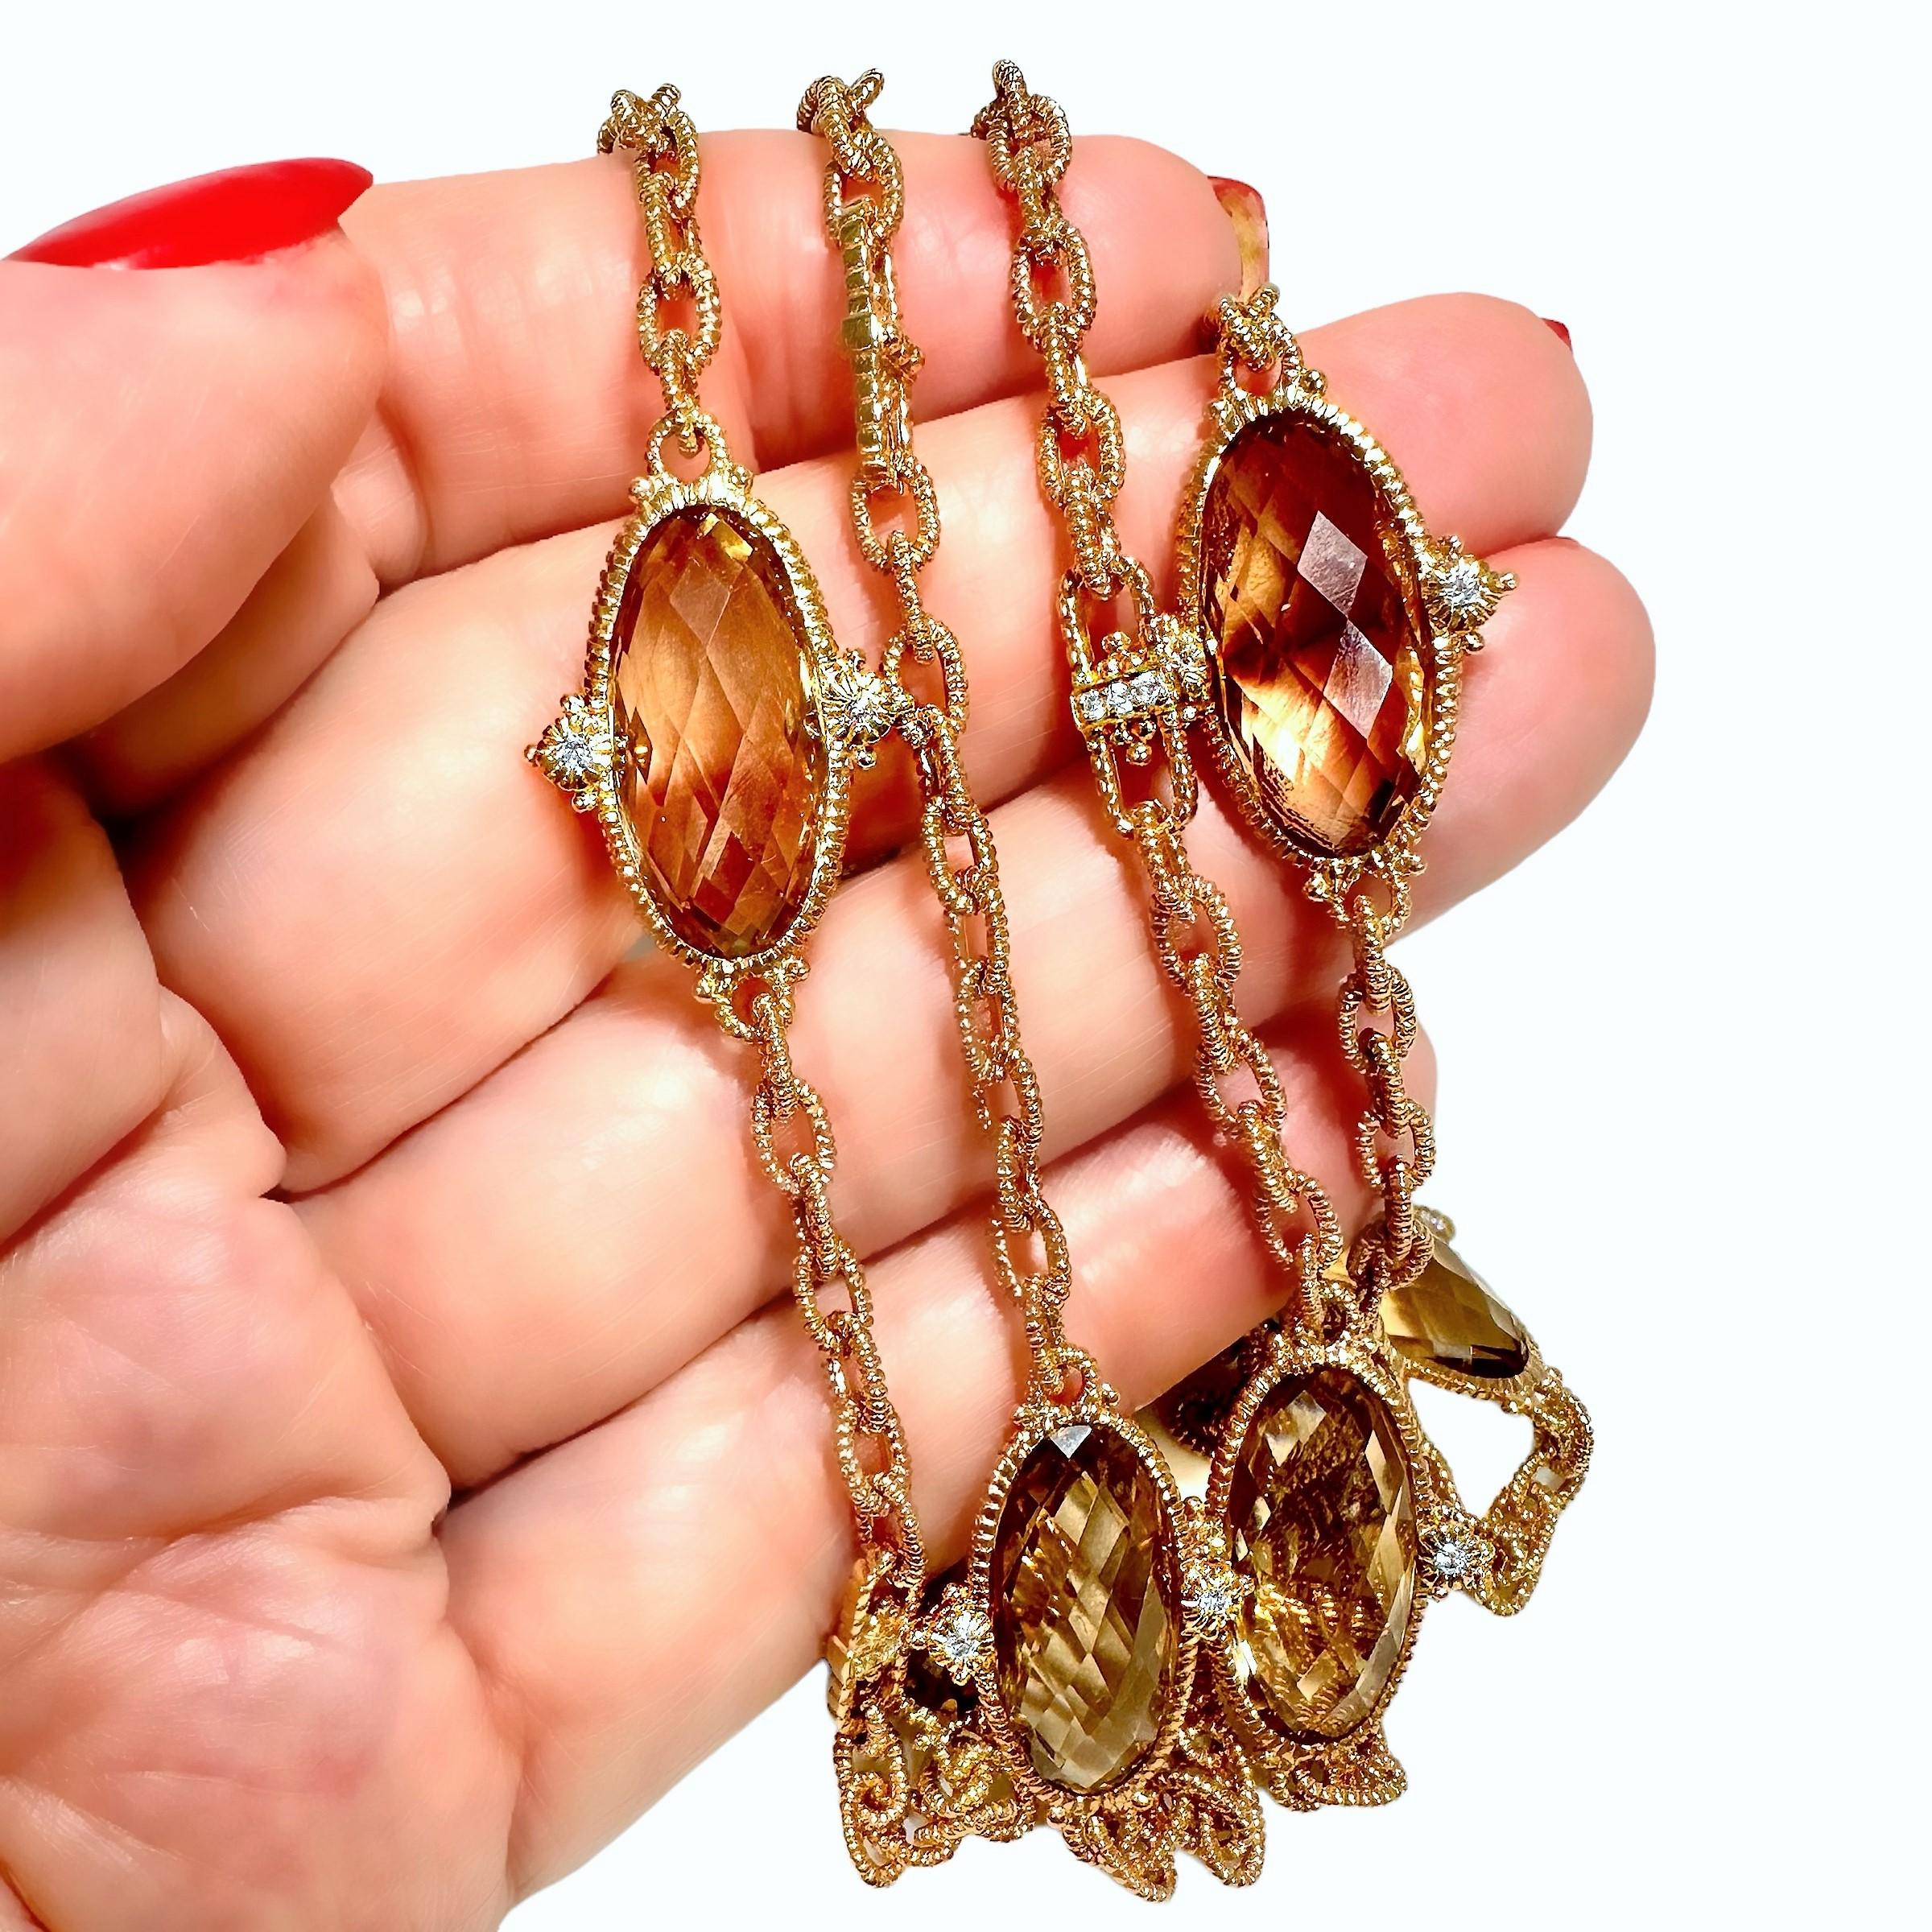 This unique Judith Ripka creation is crafted in a very bold hue of 18K rose gold, with each and every surface highly detailed and finished. Eight bezel set oval faceted smoky quartz stones punctuate the length of the necklace and brilliant cut